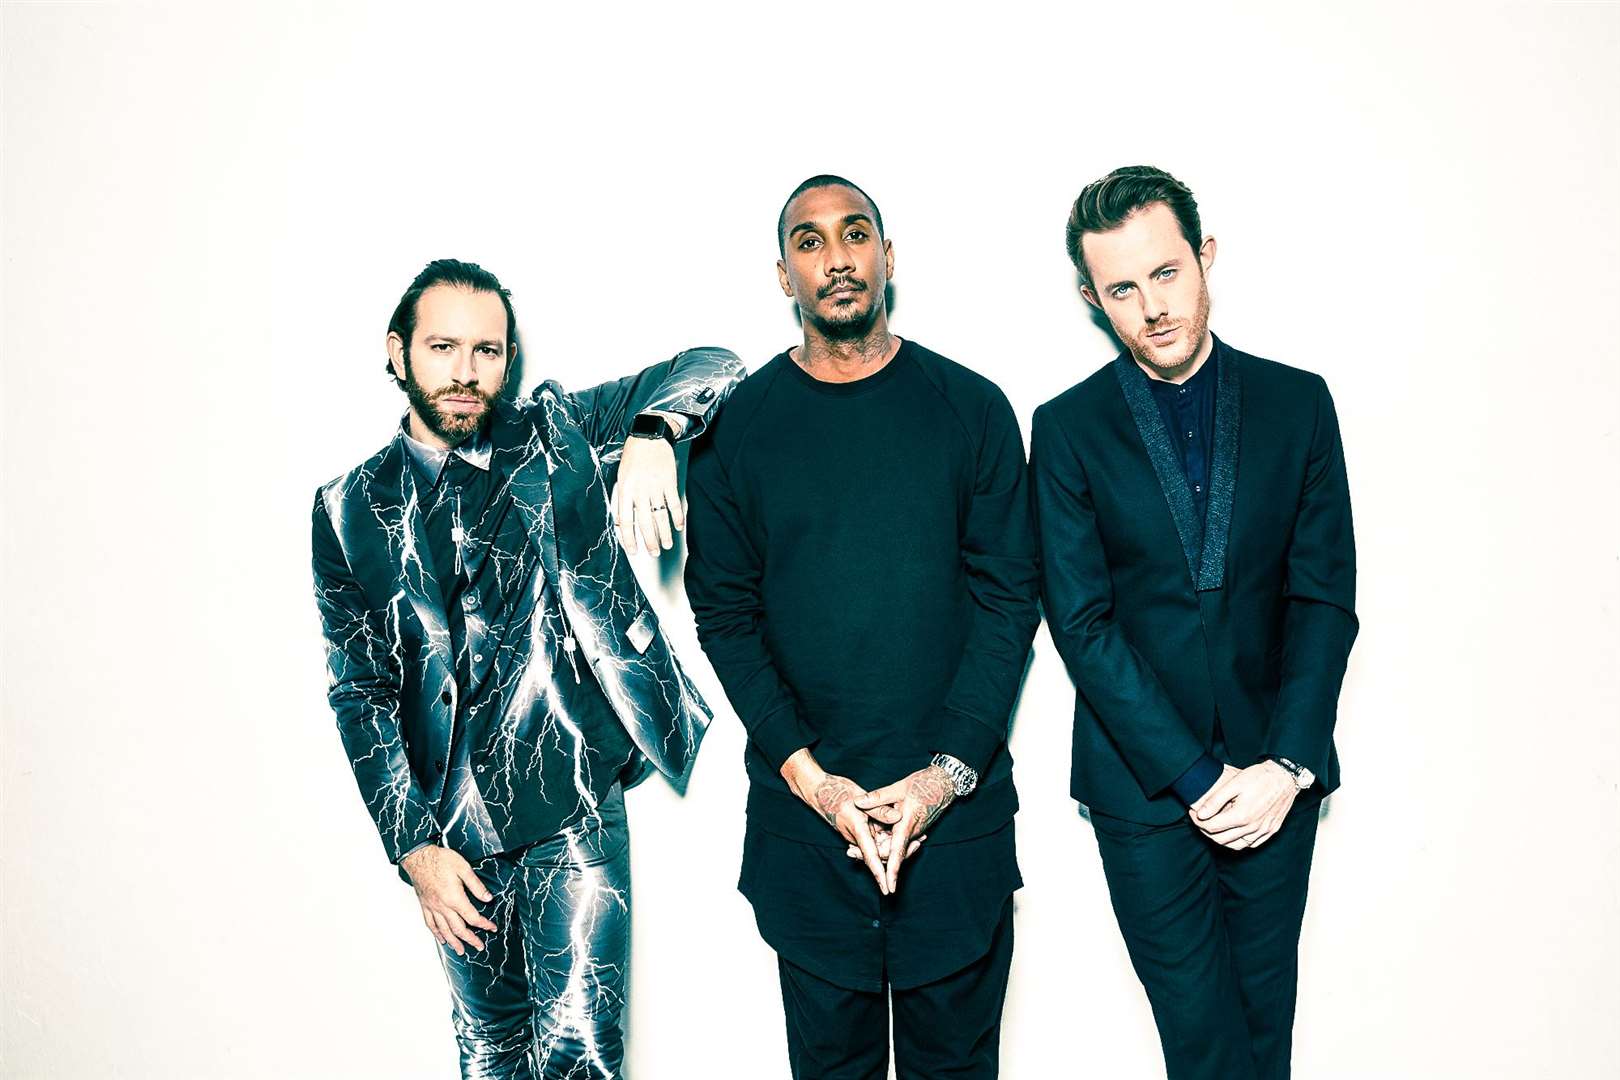 Chase and Status will perform with Rage